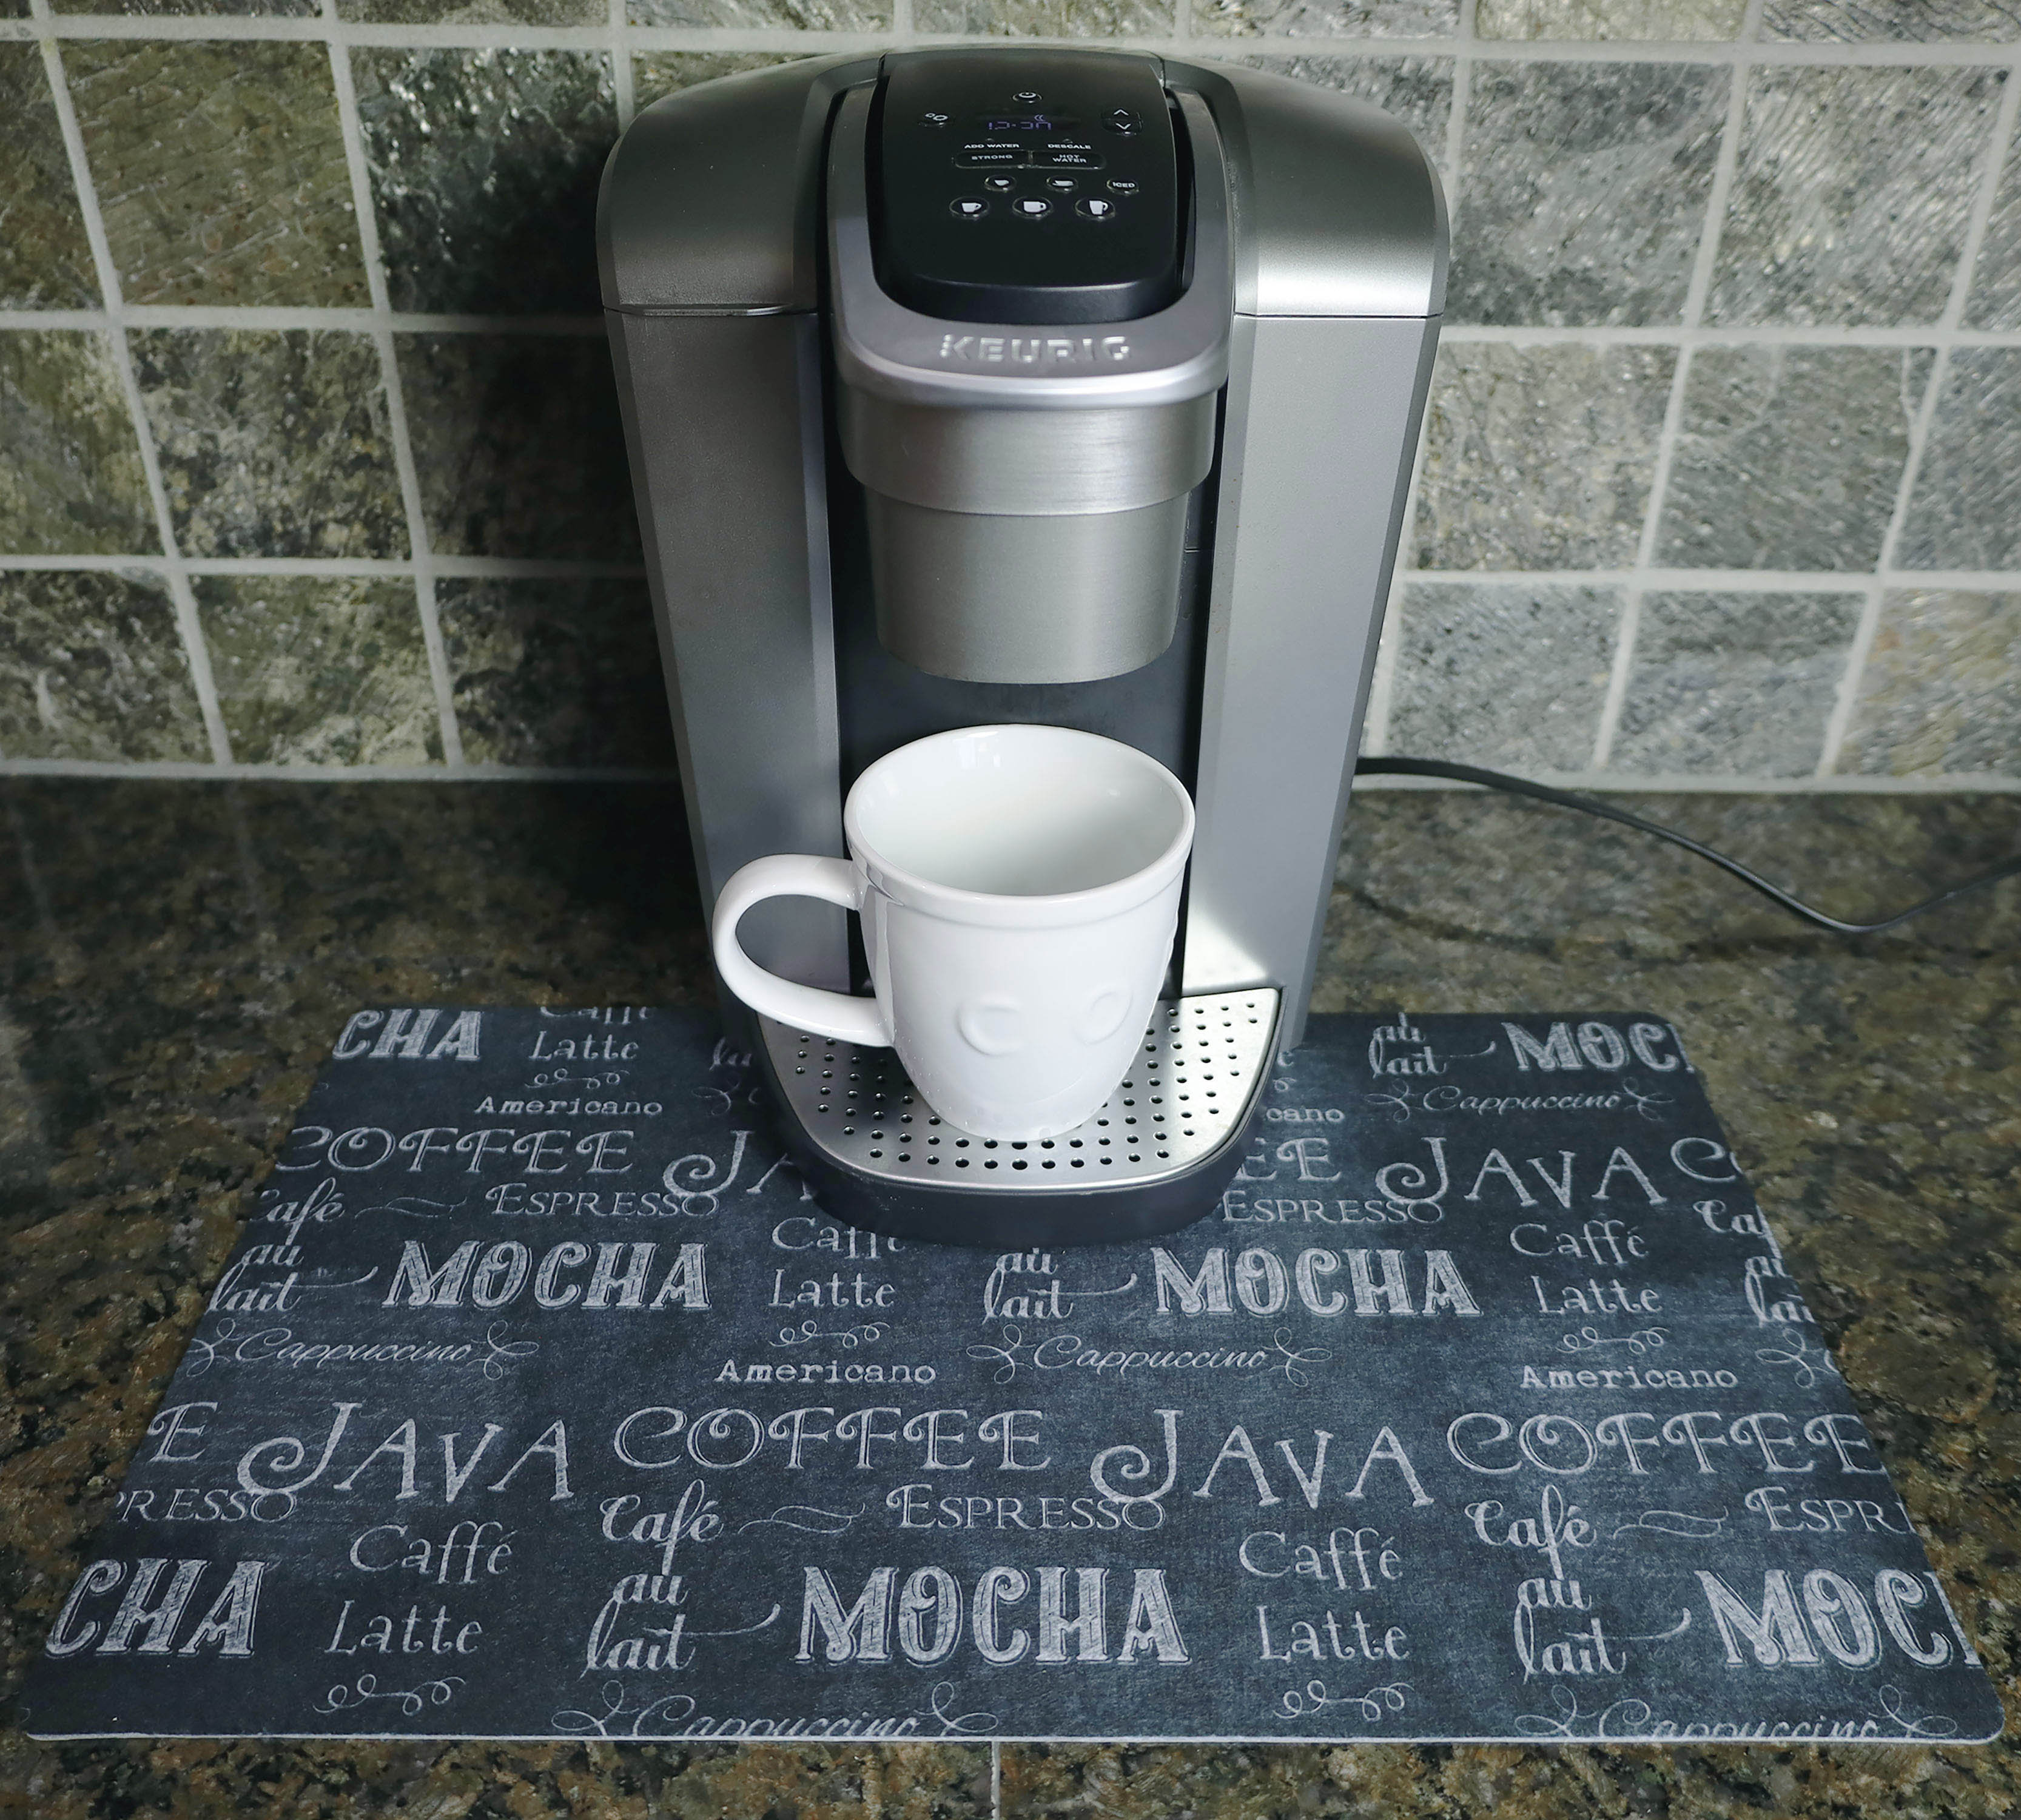 This Super Absorbent Mat Is a Smart Way to Protect Your Countertops from  Coffee Spills and Stains